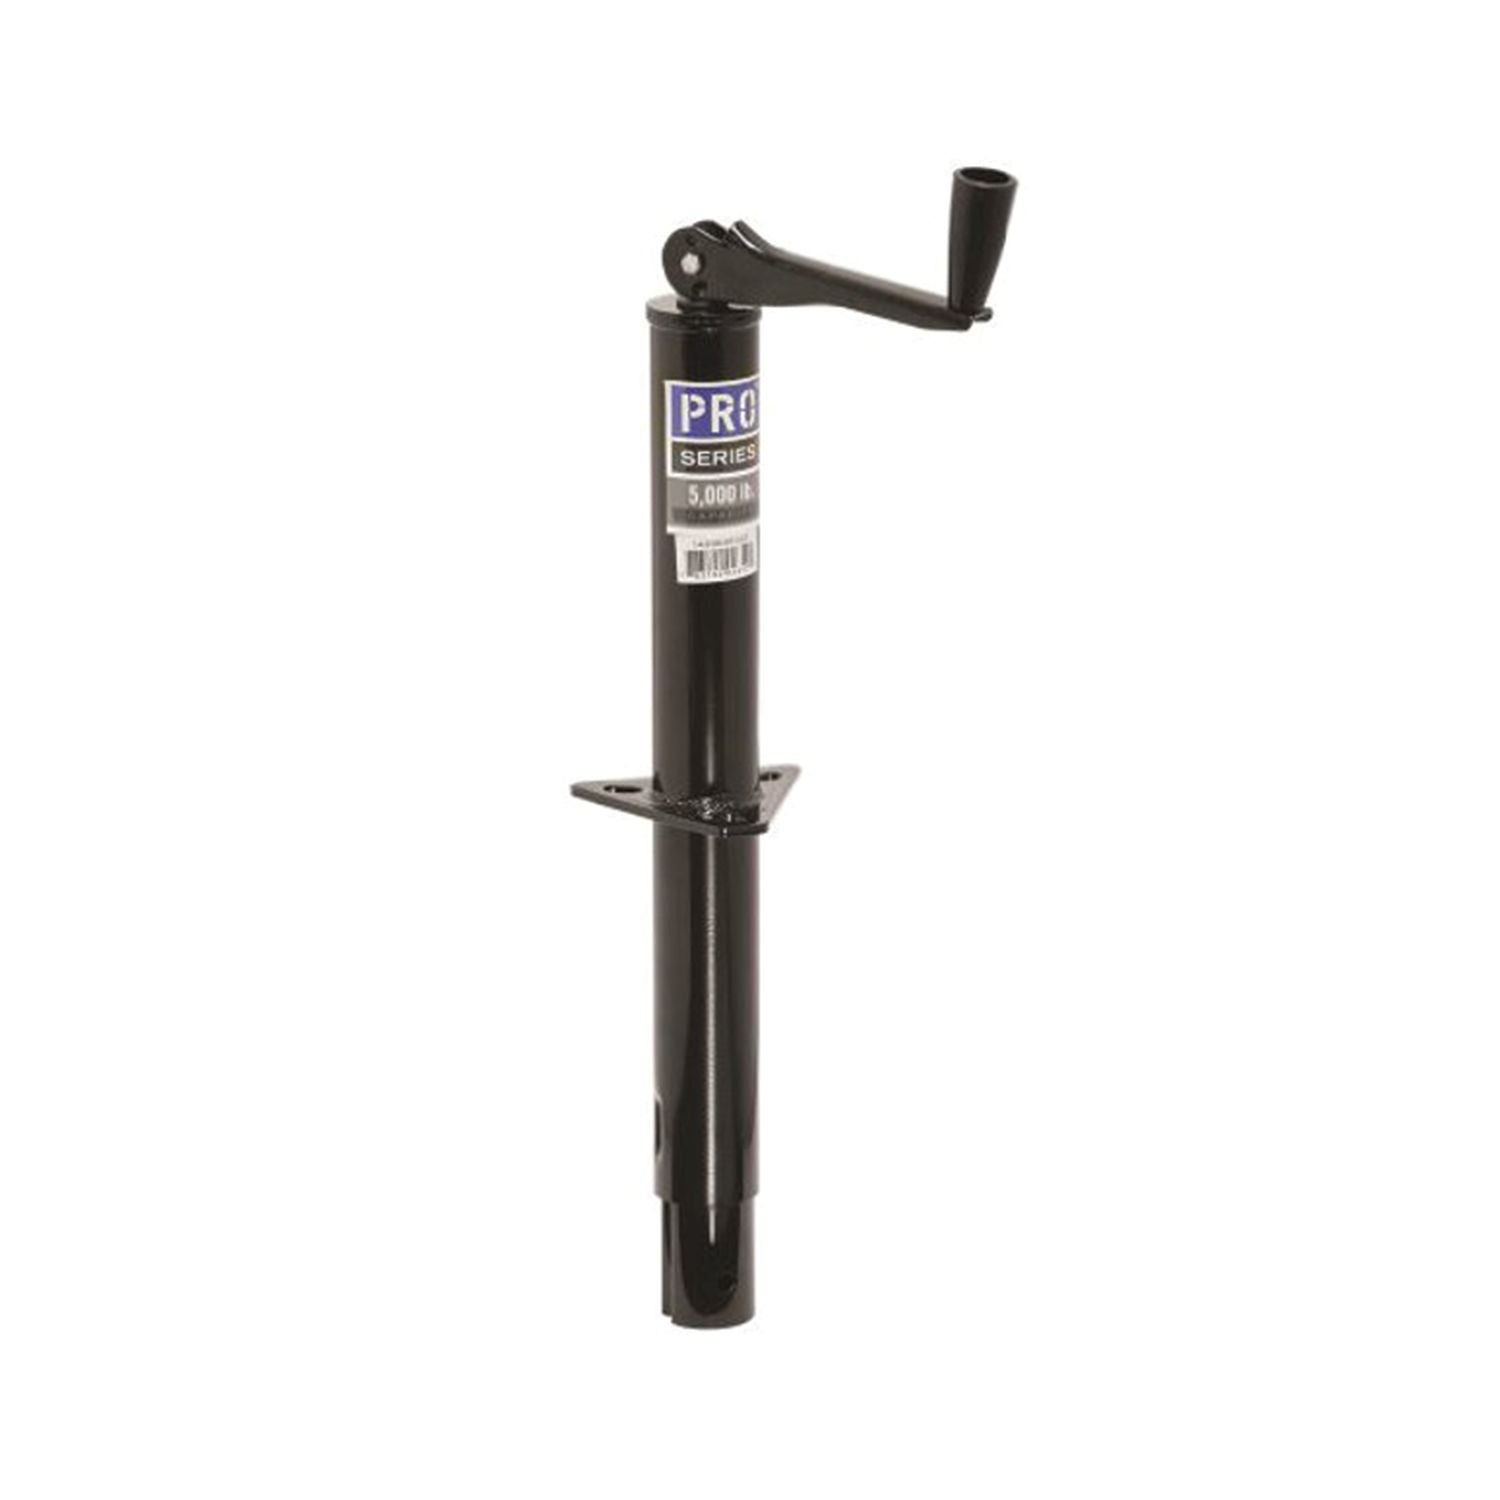 Pro Series 1400600303 - Round Trailer Jack, A-Frame, 5,000 lbs. Lift Capacity, Top Wind, Bolt-On, 15 in. Travel